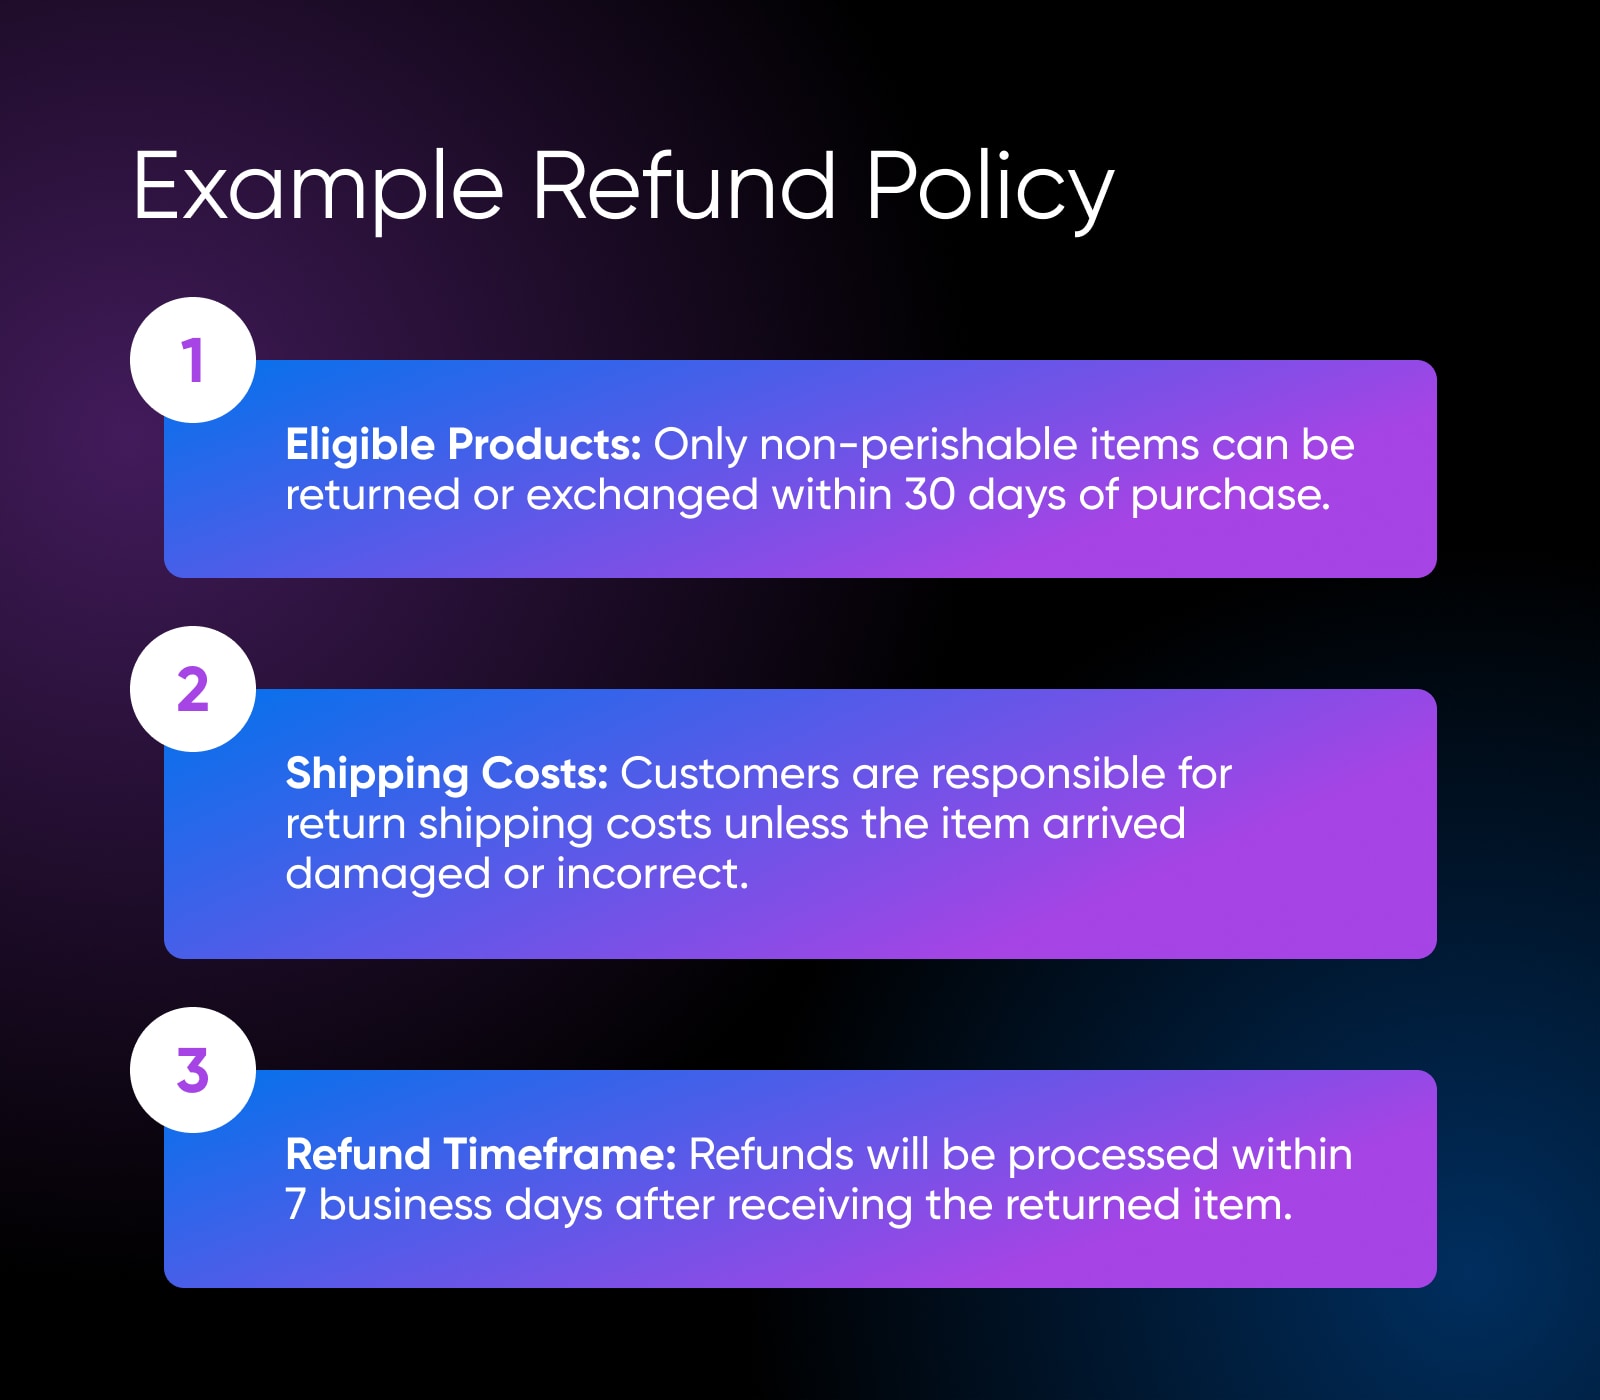 Example Refund Policy